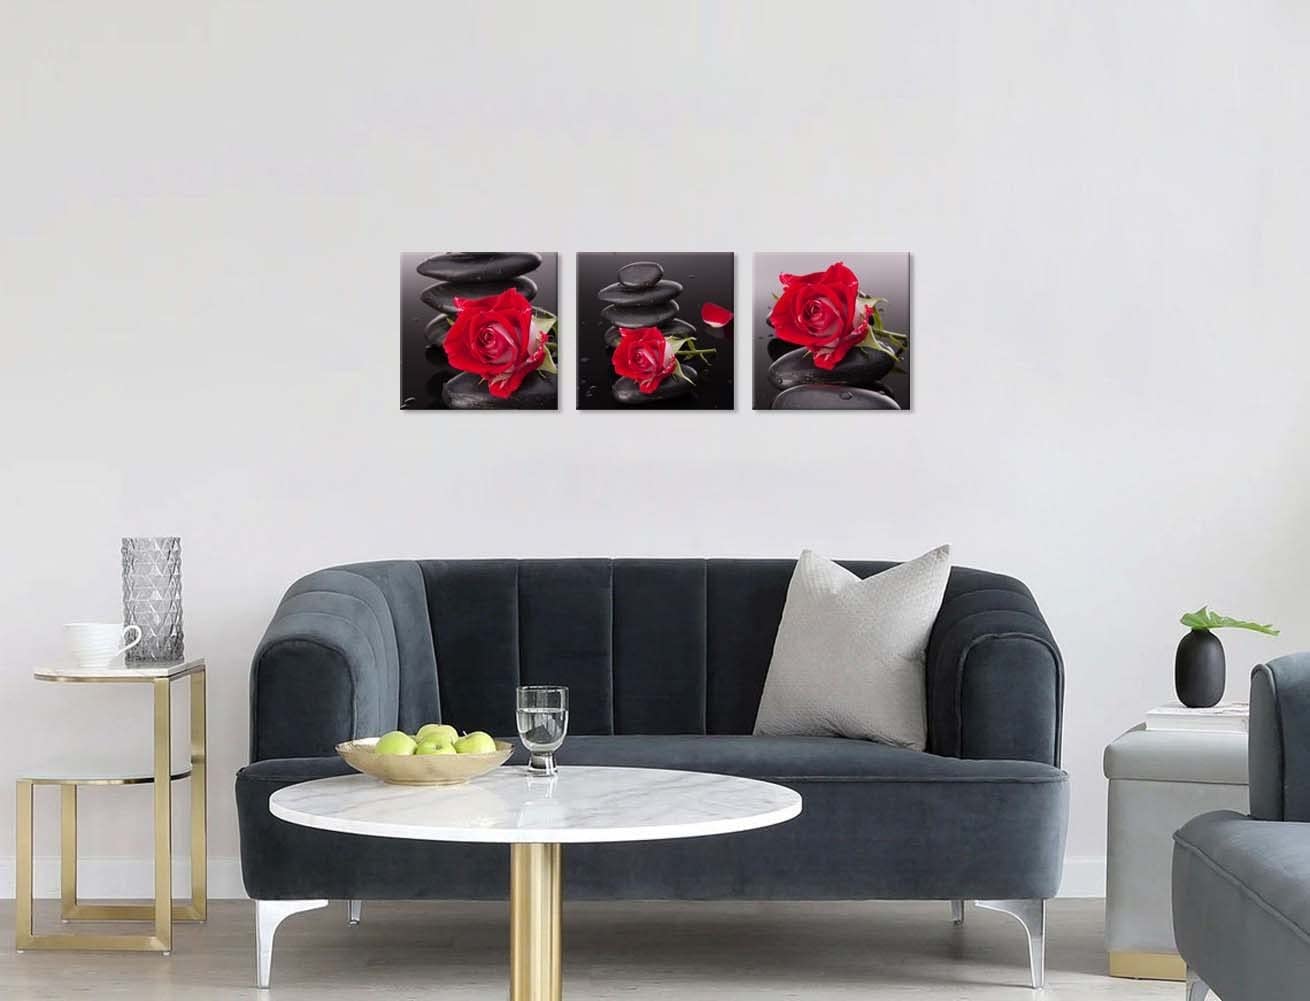 NAN Wind Canvas Print Pcs Black and White Red Rose Canvas Art Painting  Abstract Wall Art Decorations Flower Picture on Canvas for Home Decor  Stretched and Framed (20X20inchX3pcs rose2)